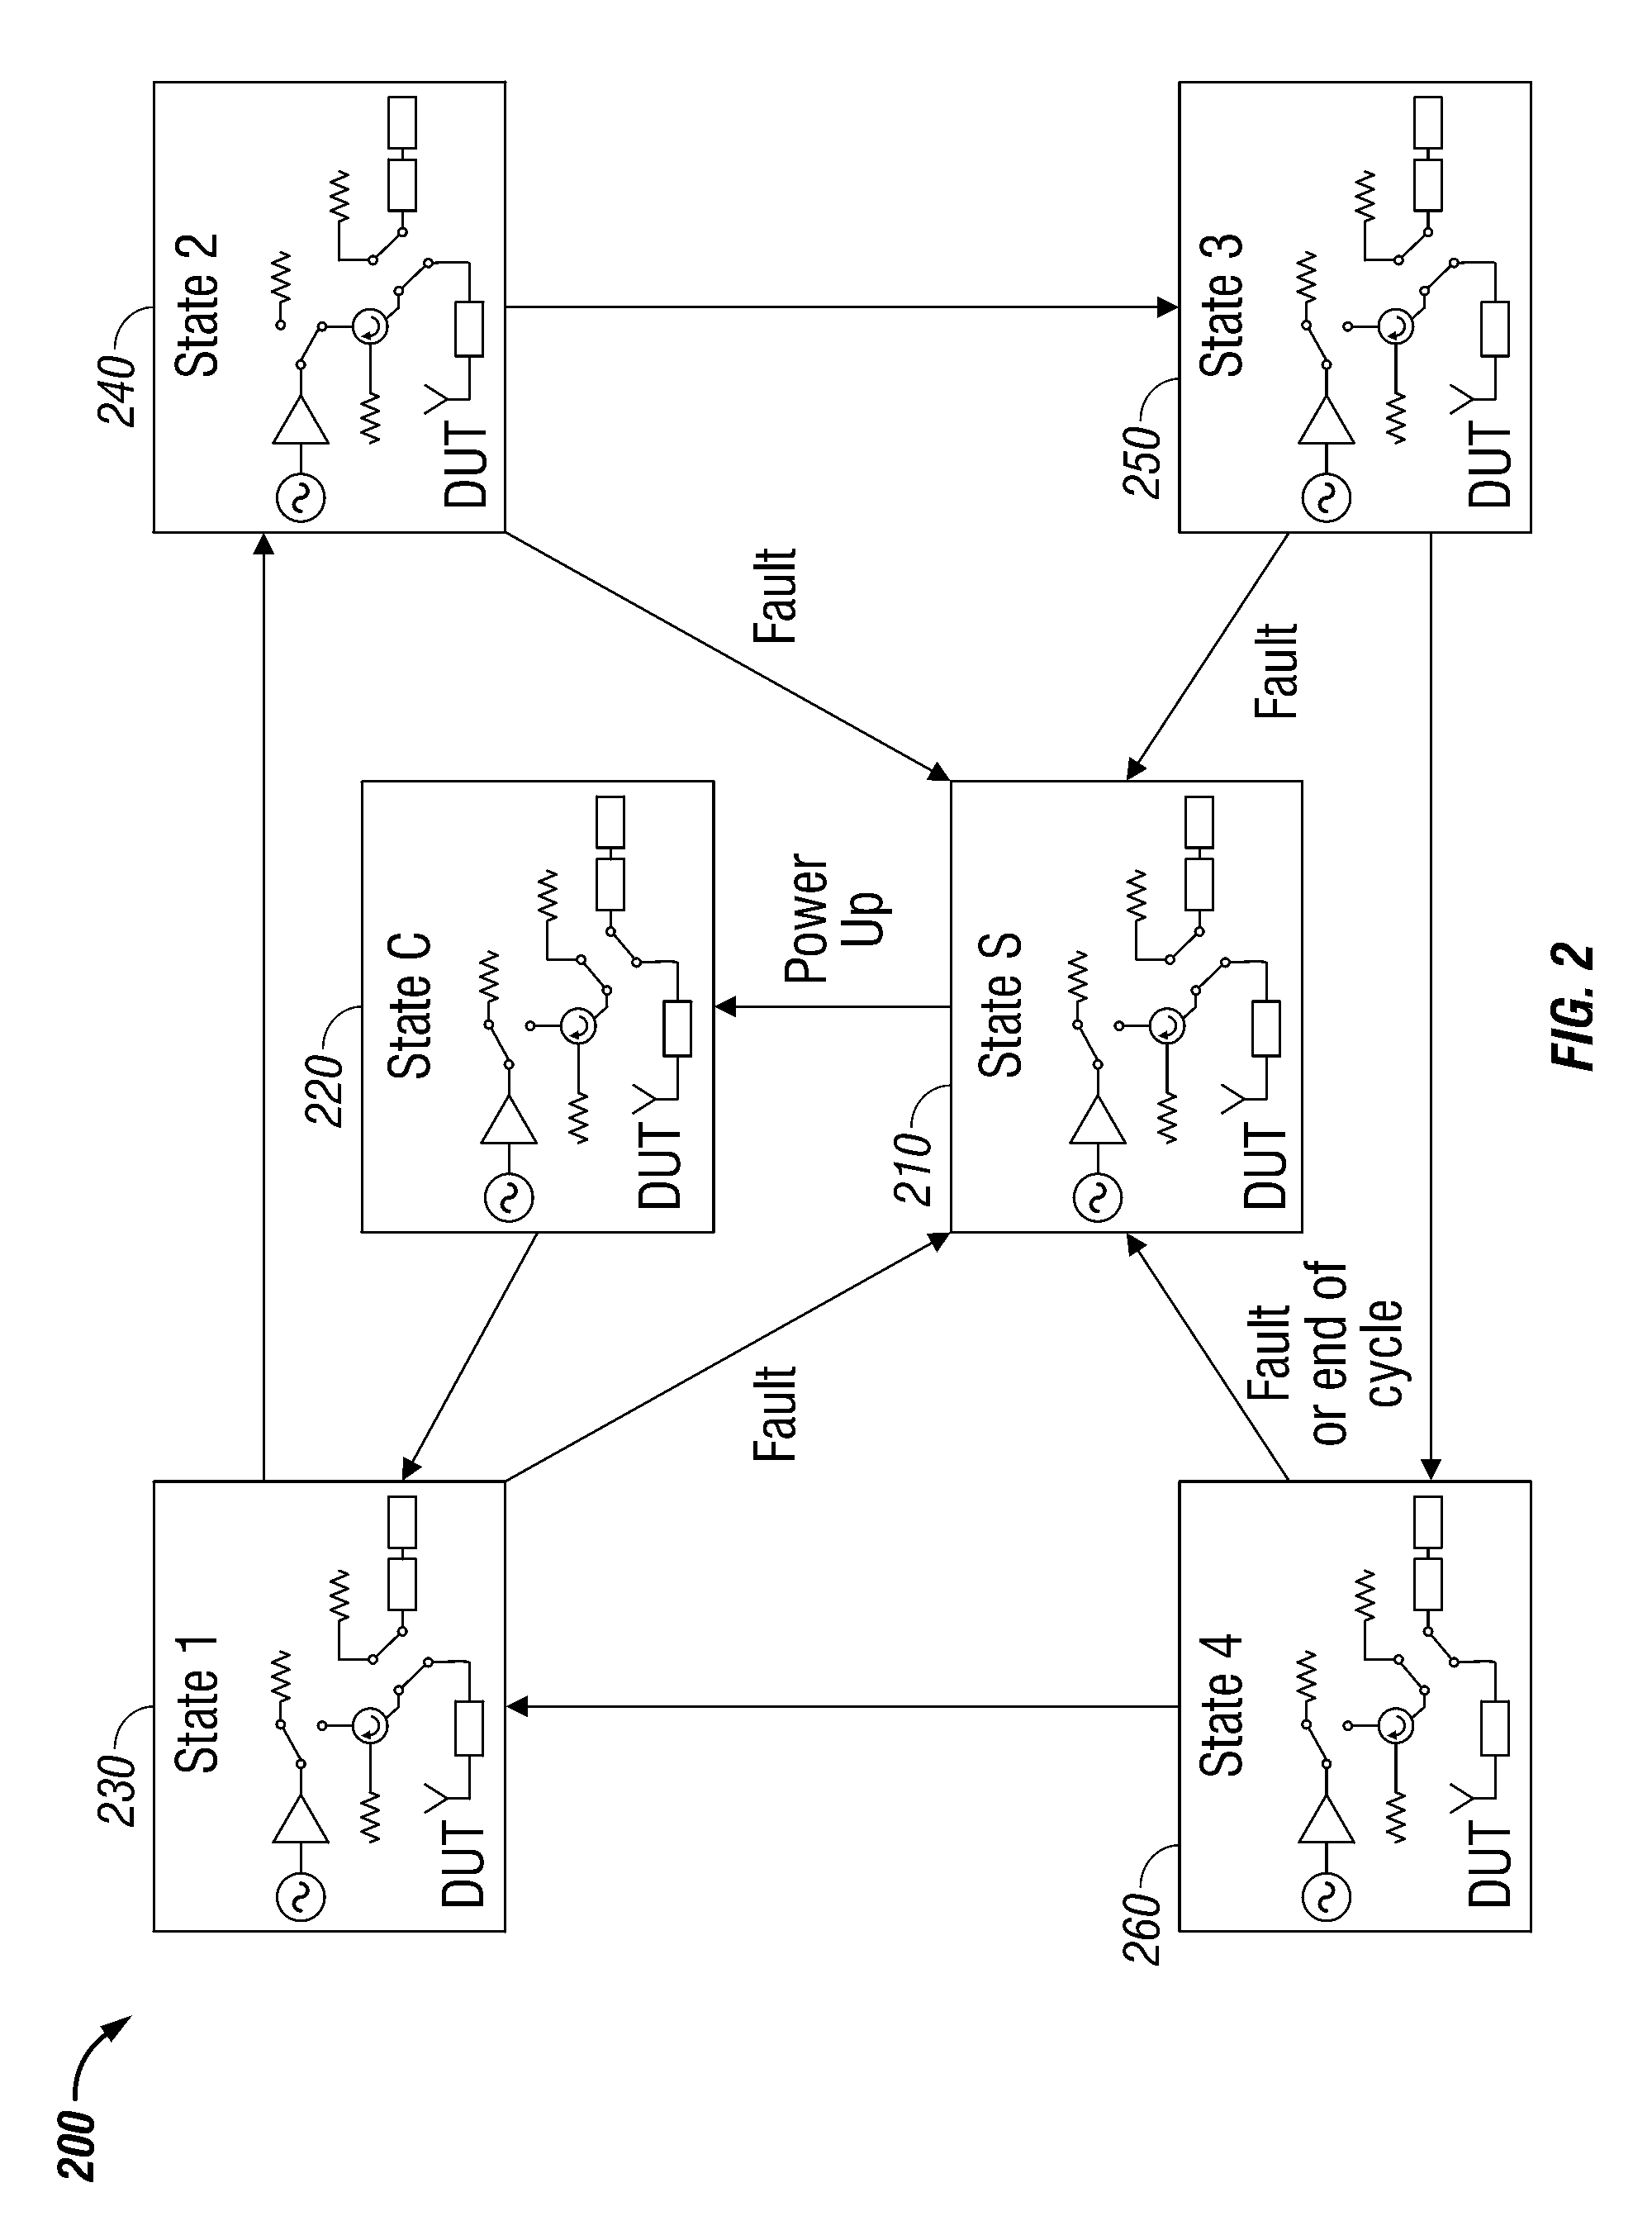 Microwave system calibration apparatus and method of use